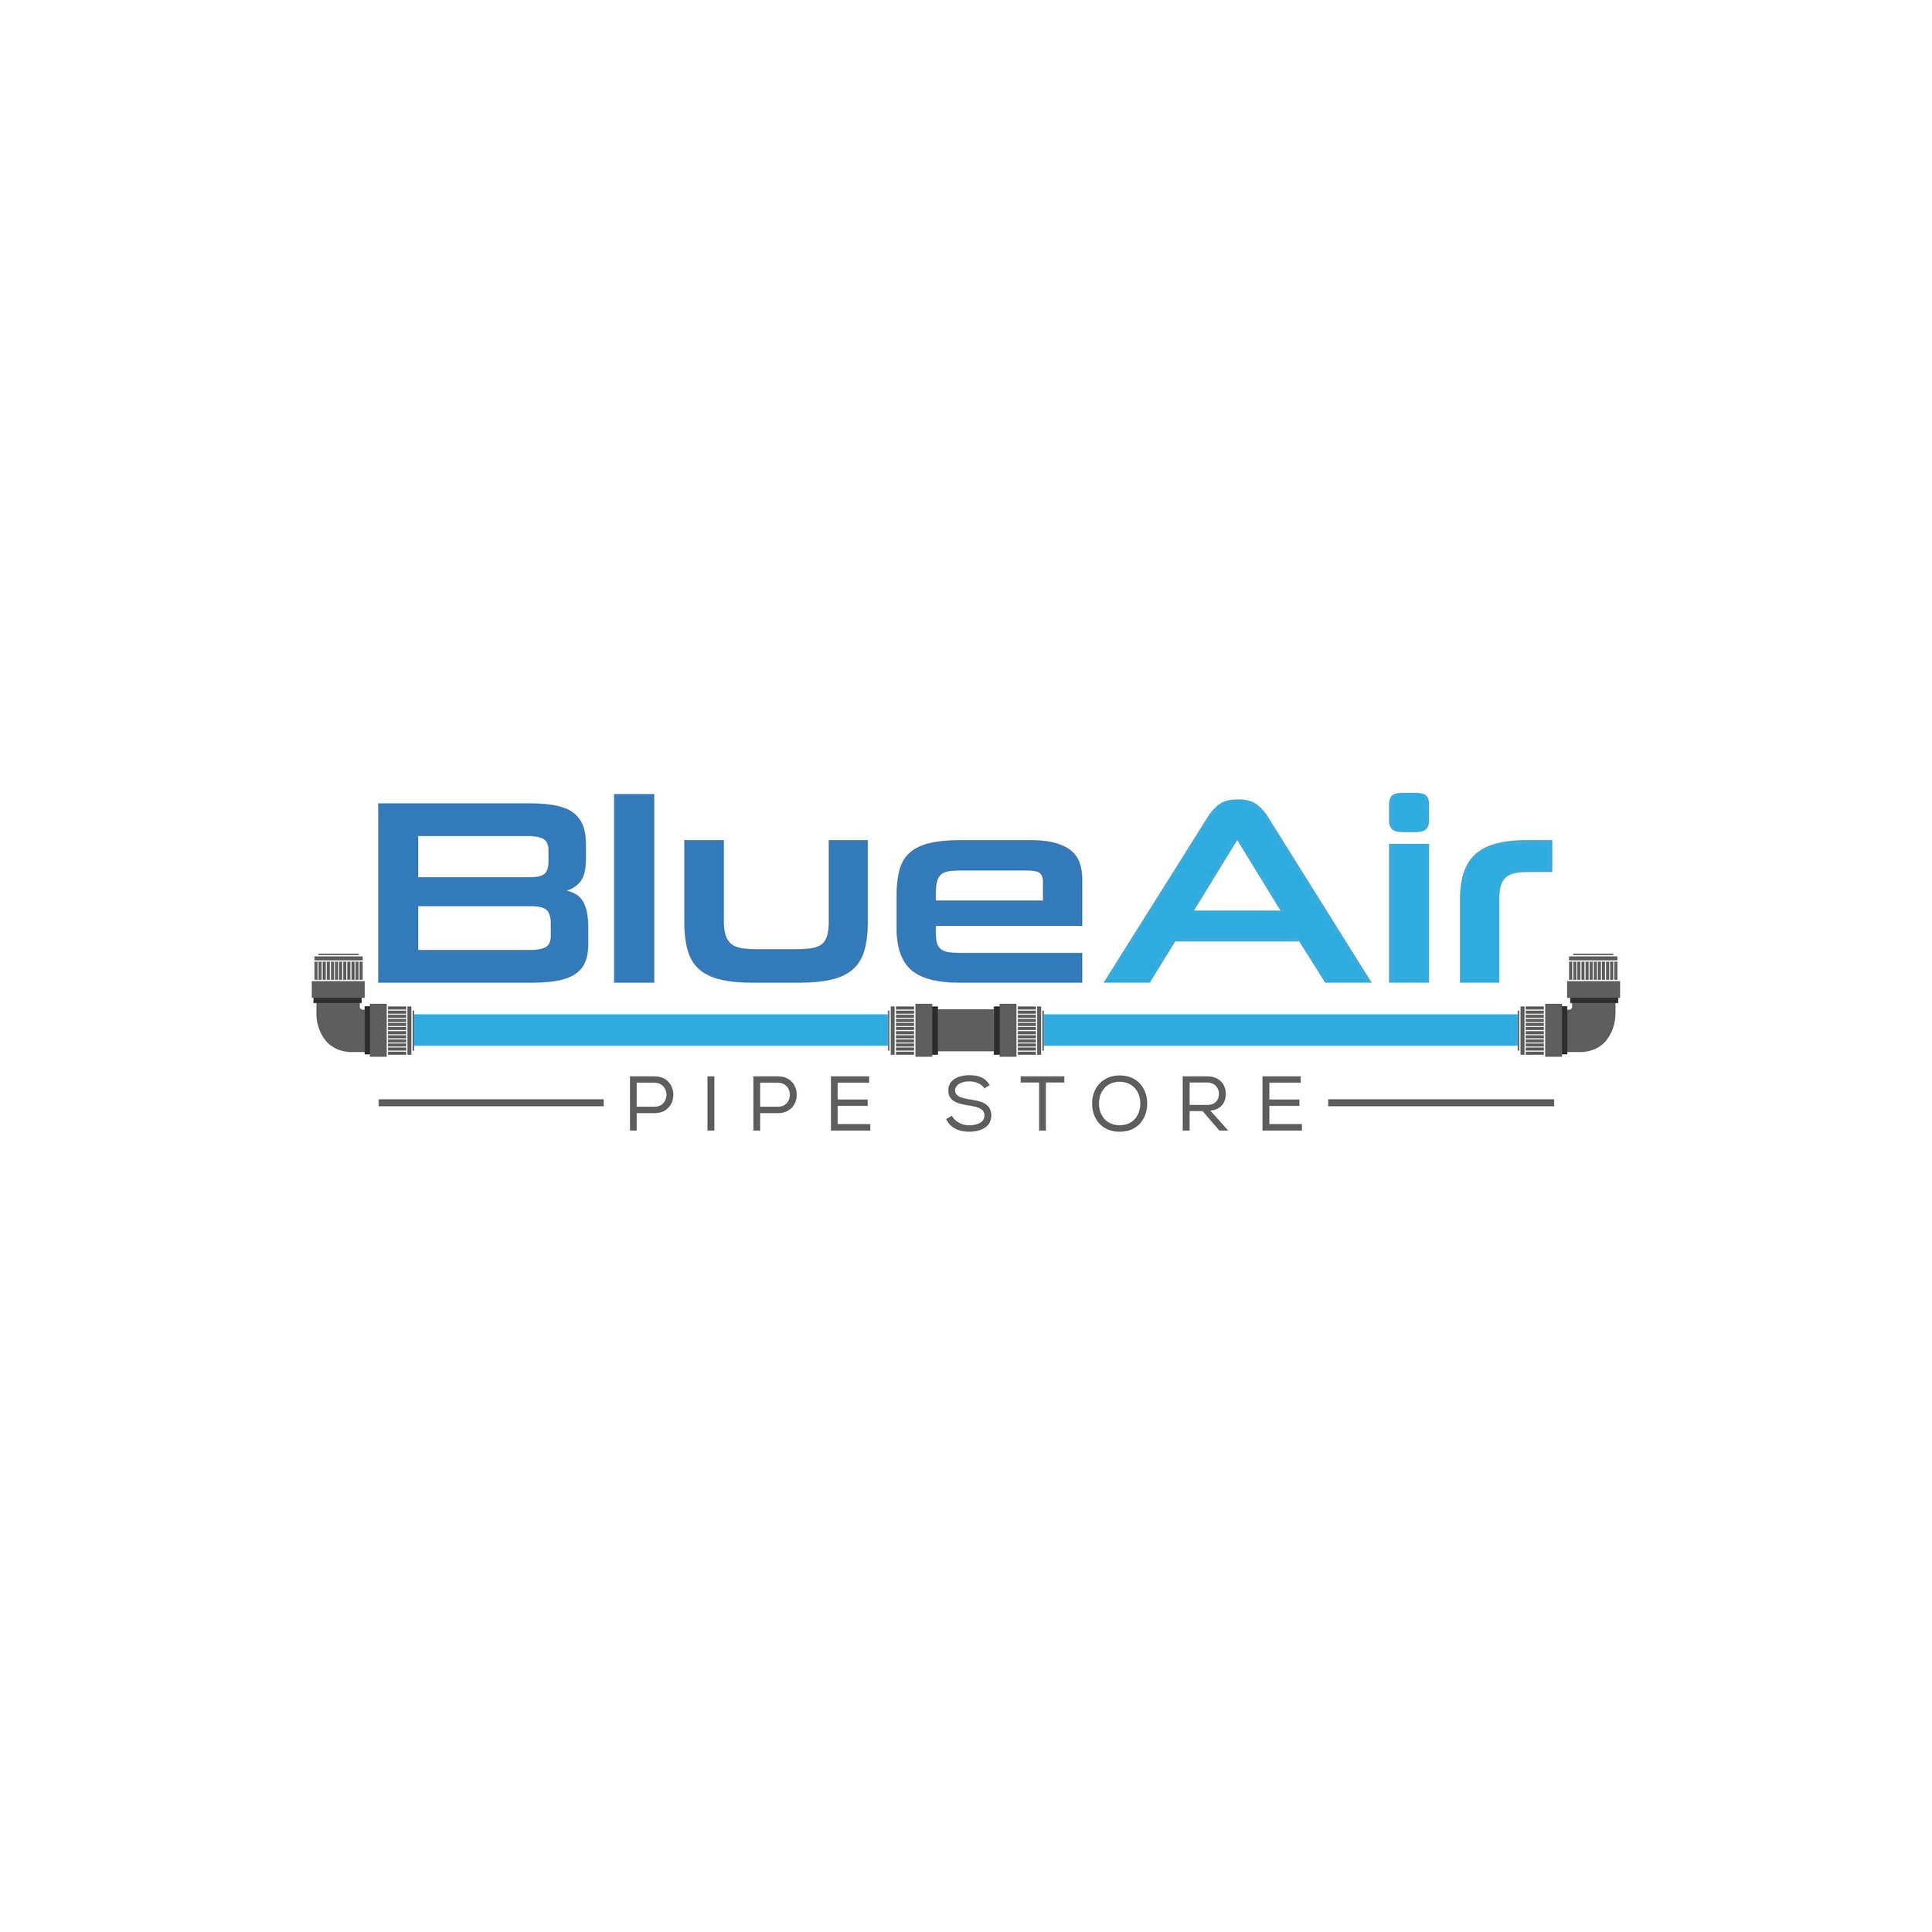 The Blue Air Pipe Store